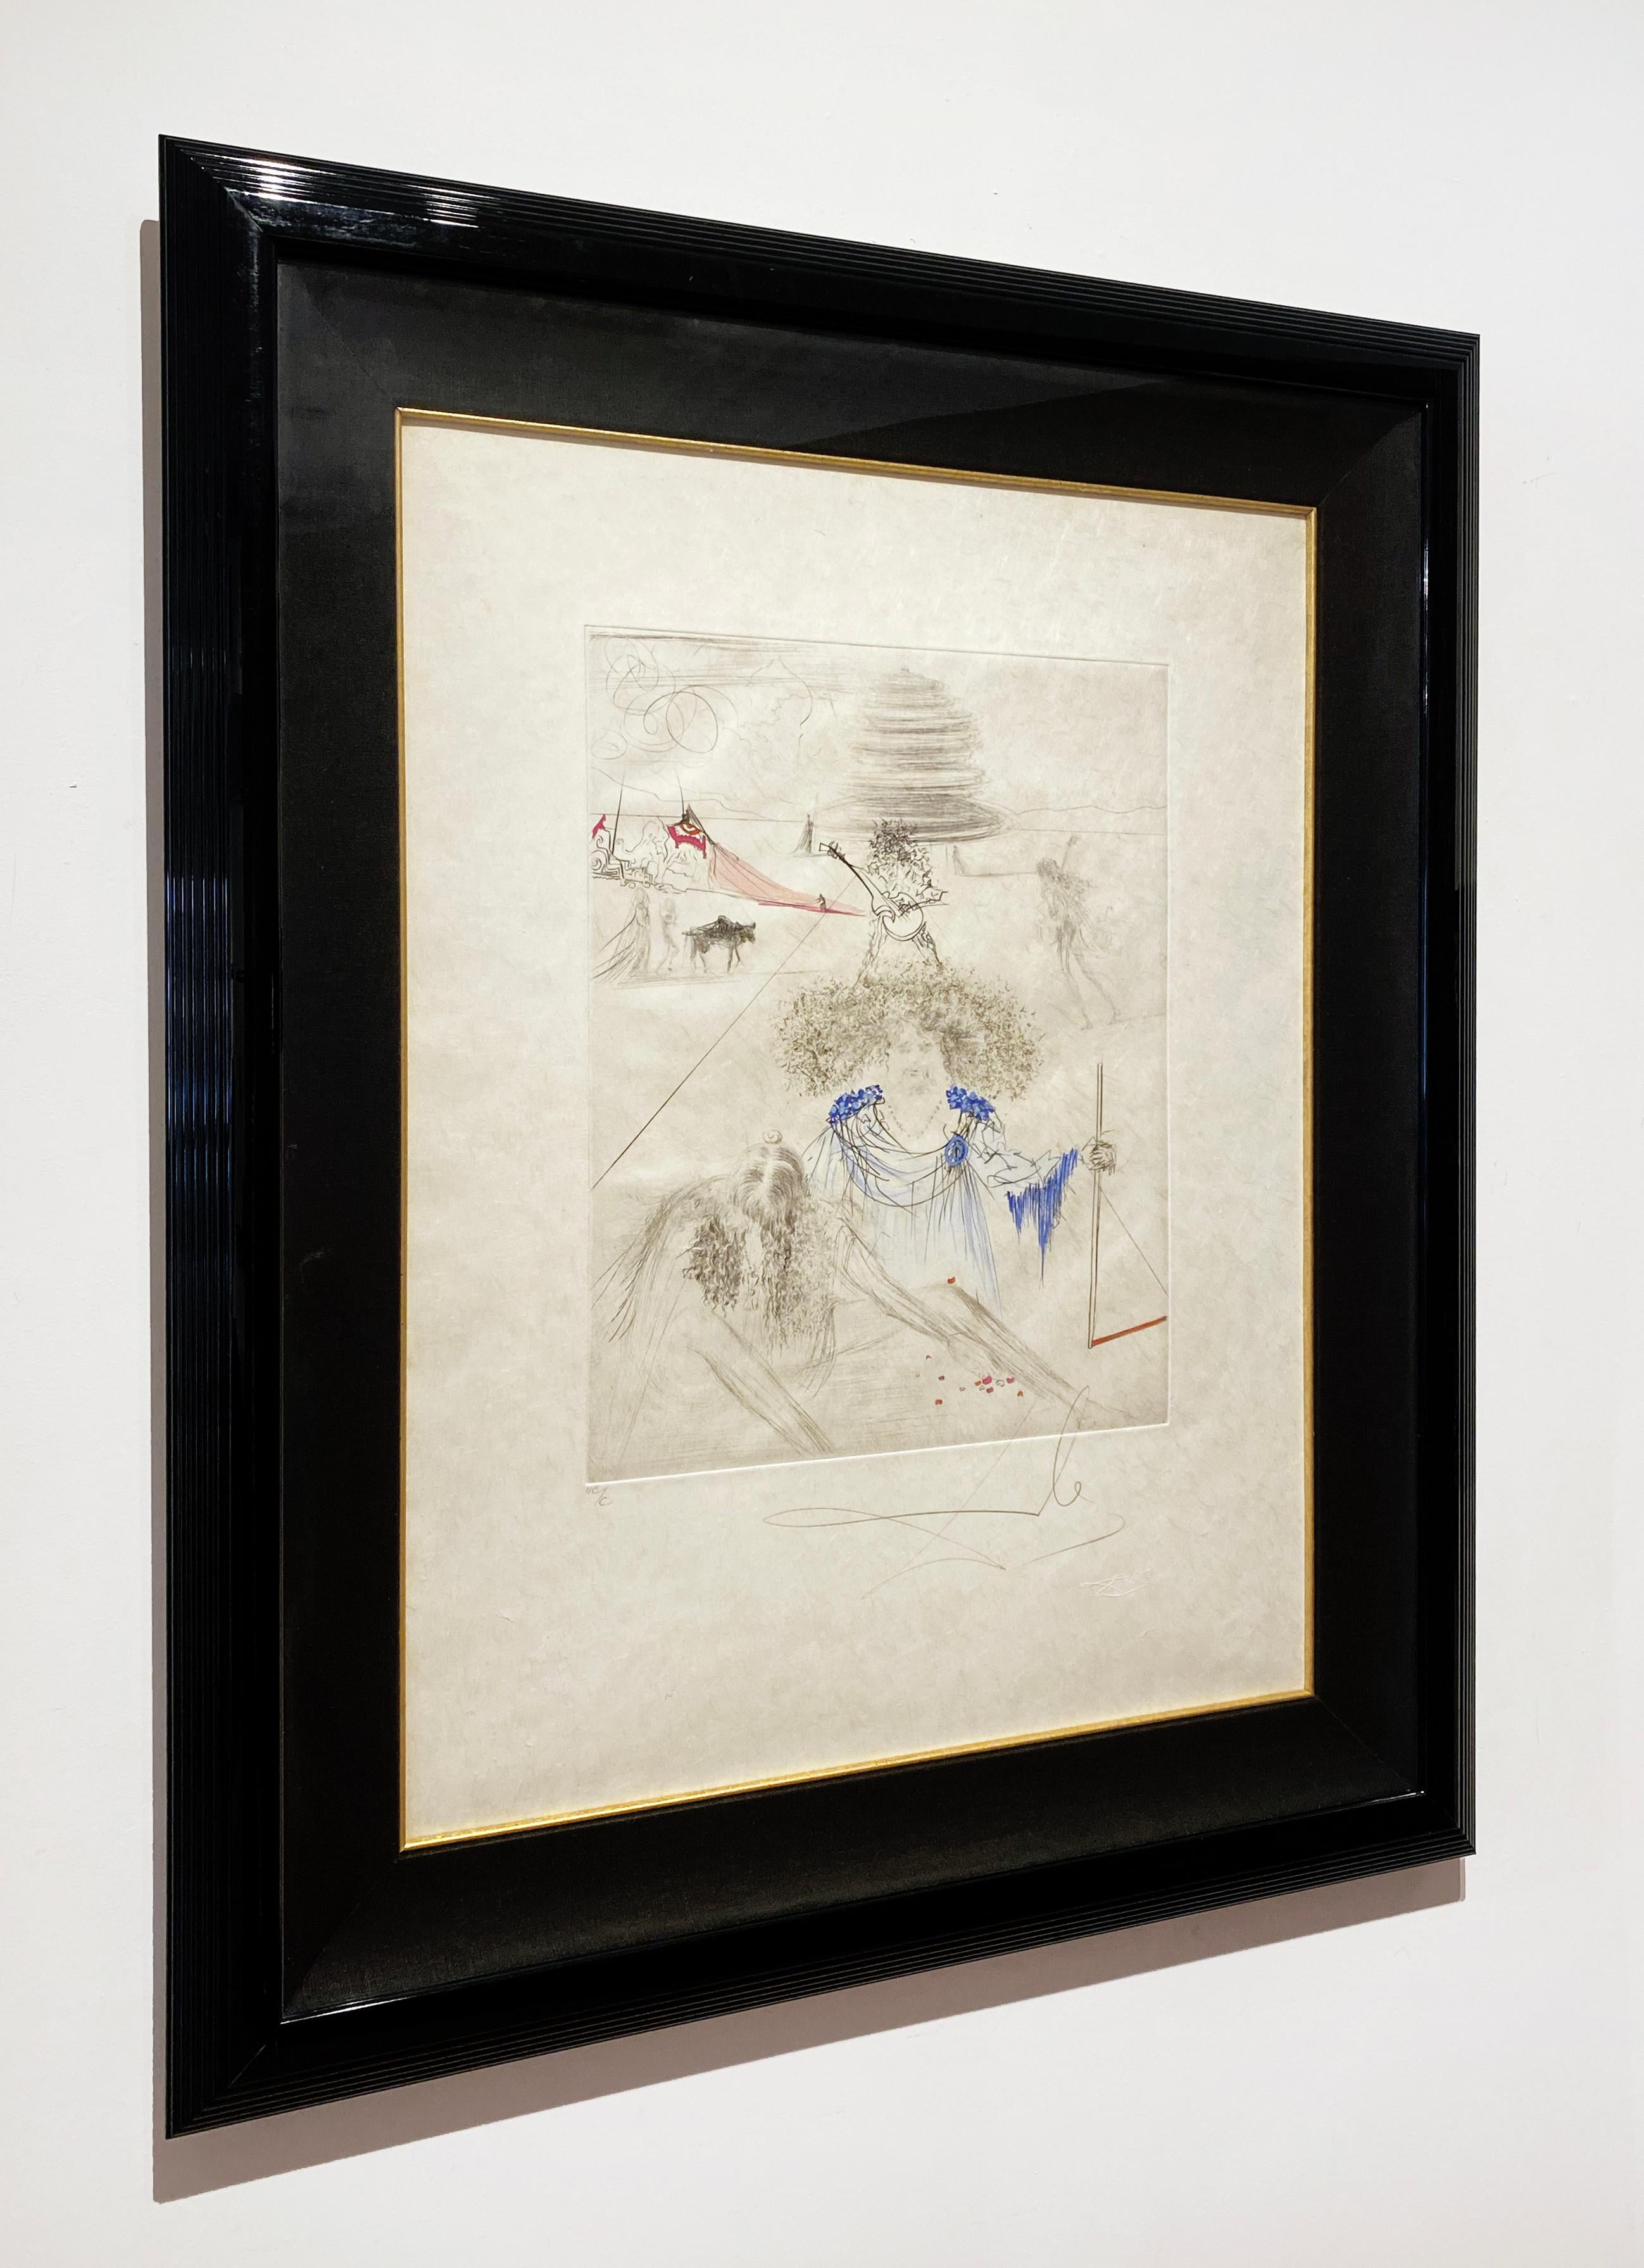 Artist:  Dali, Salvador
Title:  The Old Hippie
Series:  The Hippies
Date:  1969
Medium:  drypoint with added color
Signature:  Pencil signed
Edition:  /C
Literature:  AF 56
Provenance:  Acquired directly from the Artist, Private Collection, Palm